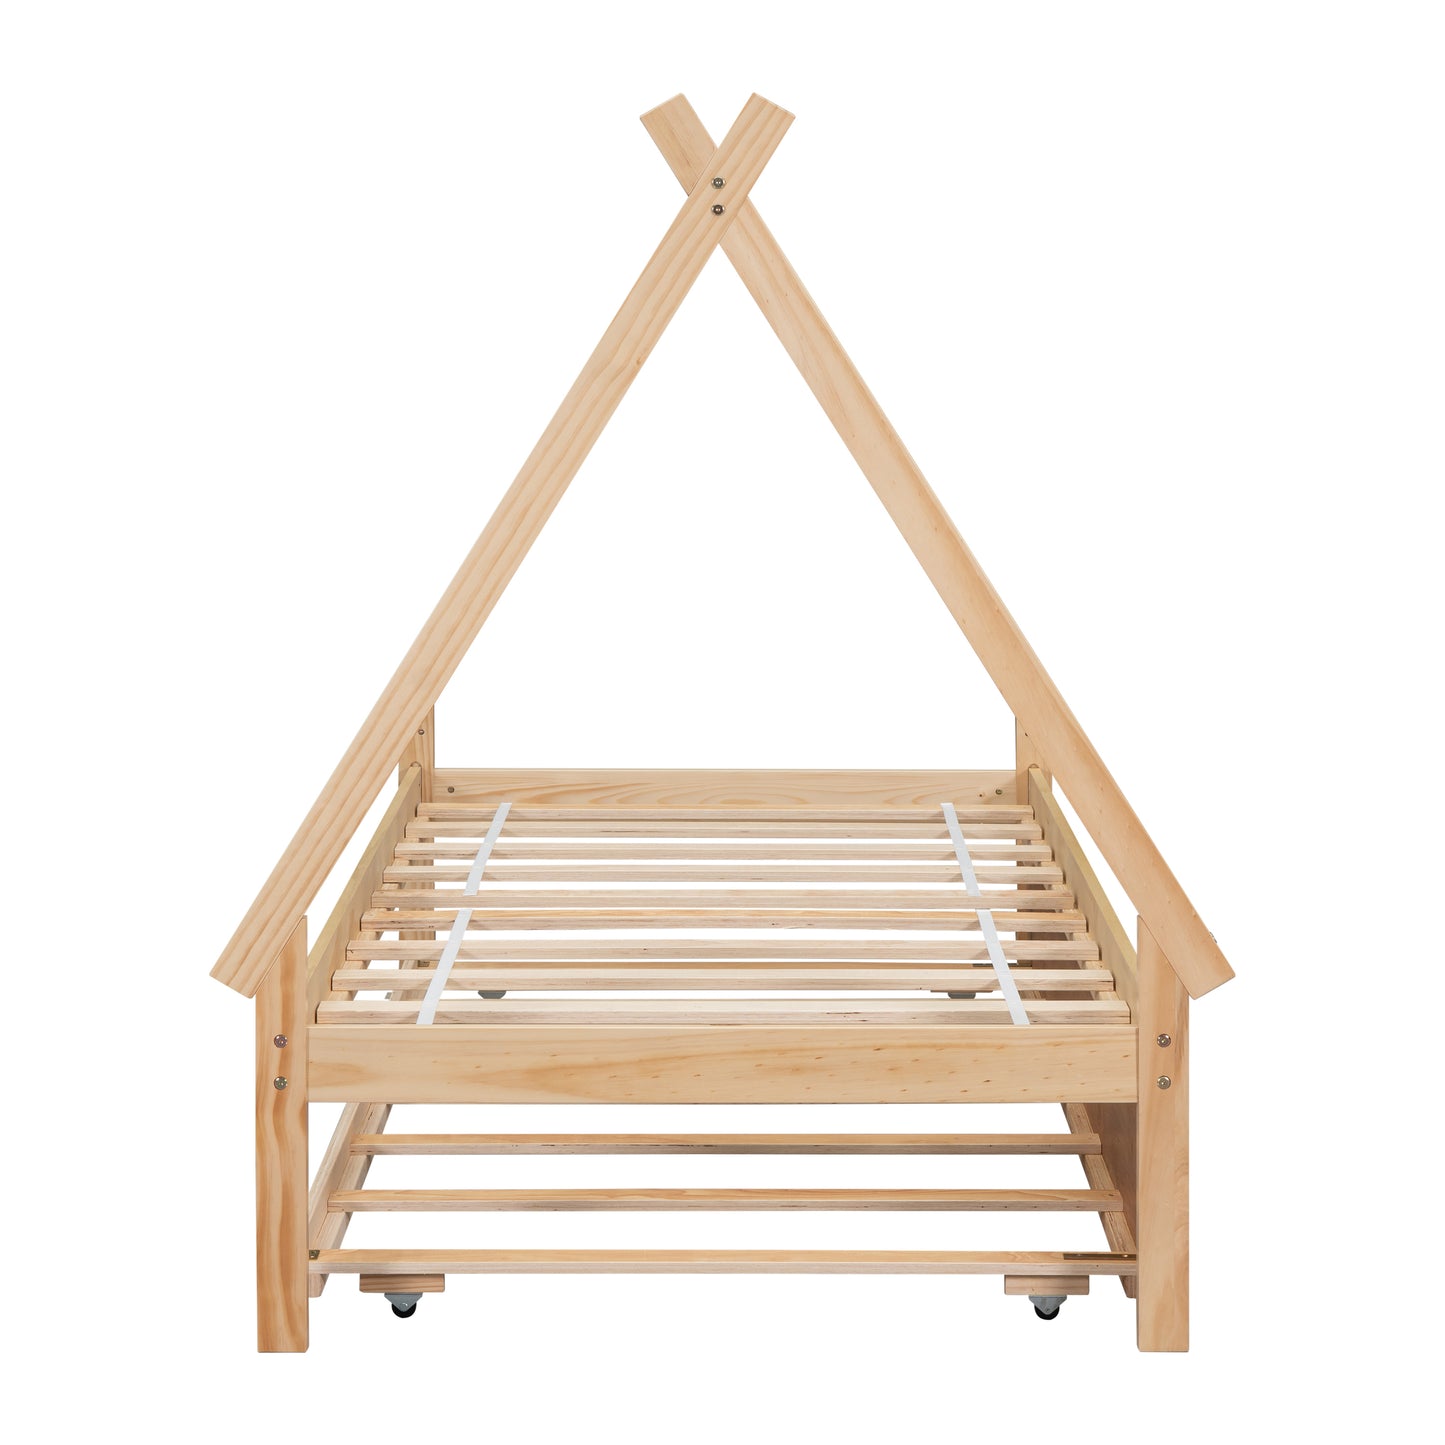 Twin size Tent Floor Platform Bed, Teepee Bed, with Trundle, Natural